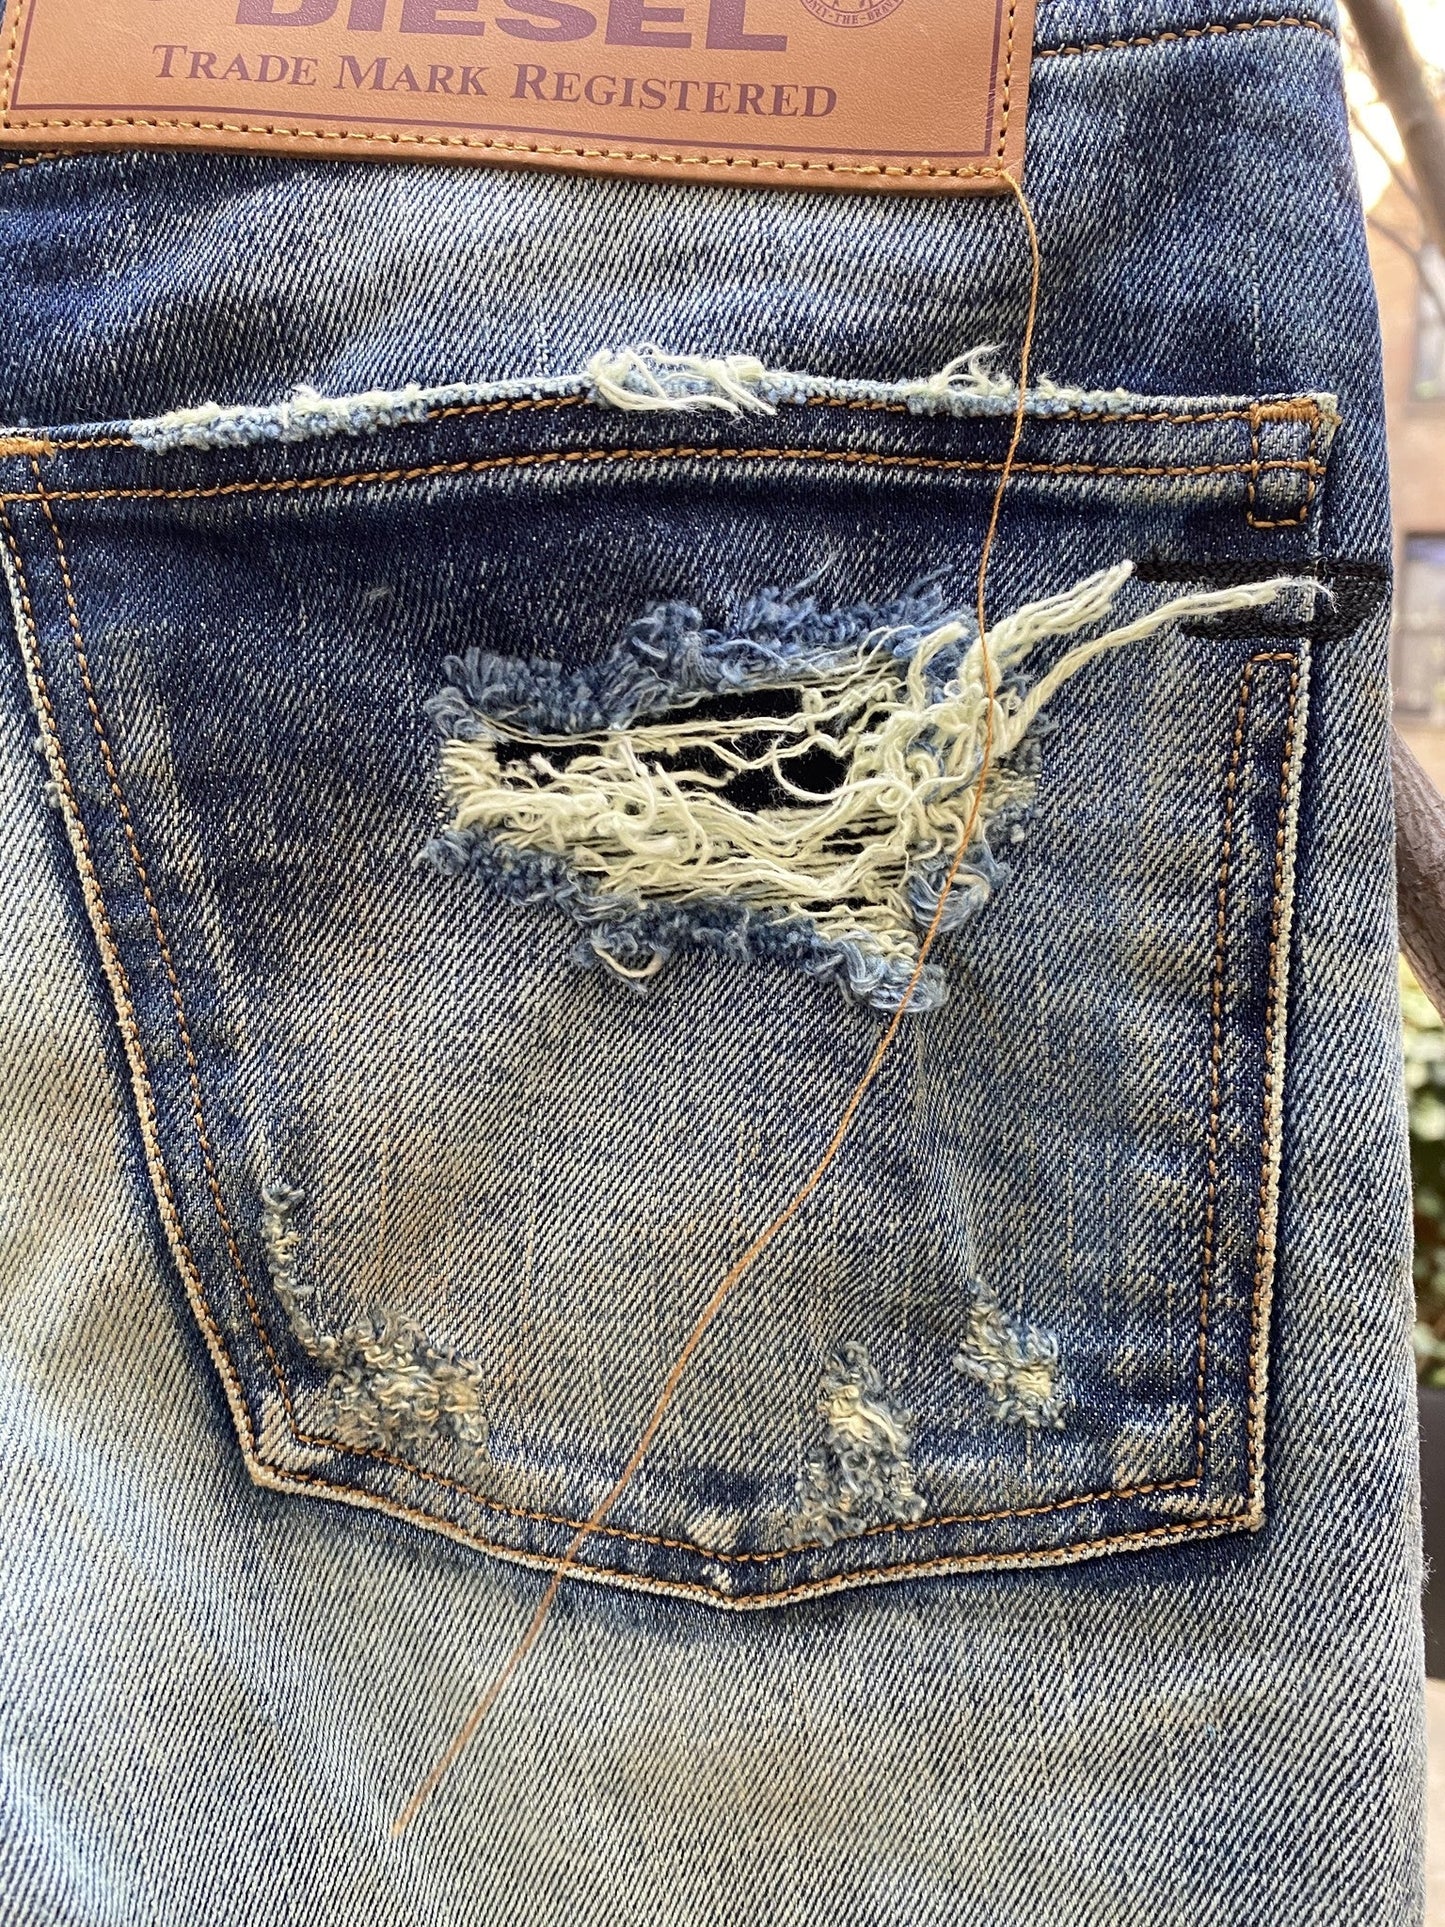 A pair of DIESEL D-KRAS-X-SP4 09VI DENIM jeans with a hole in the pocket.